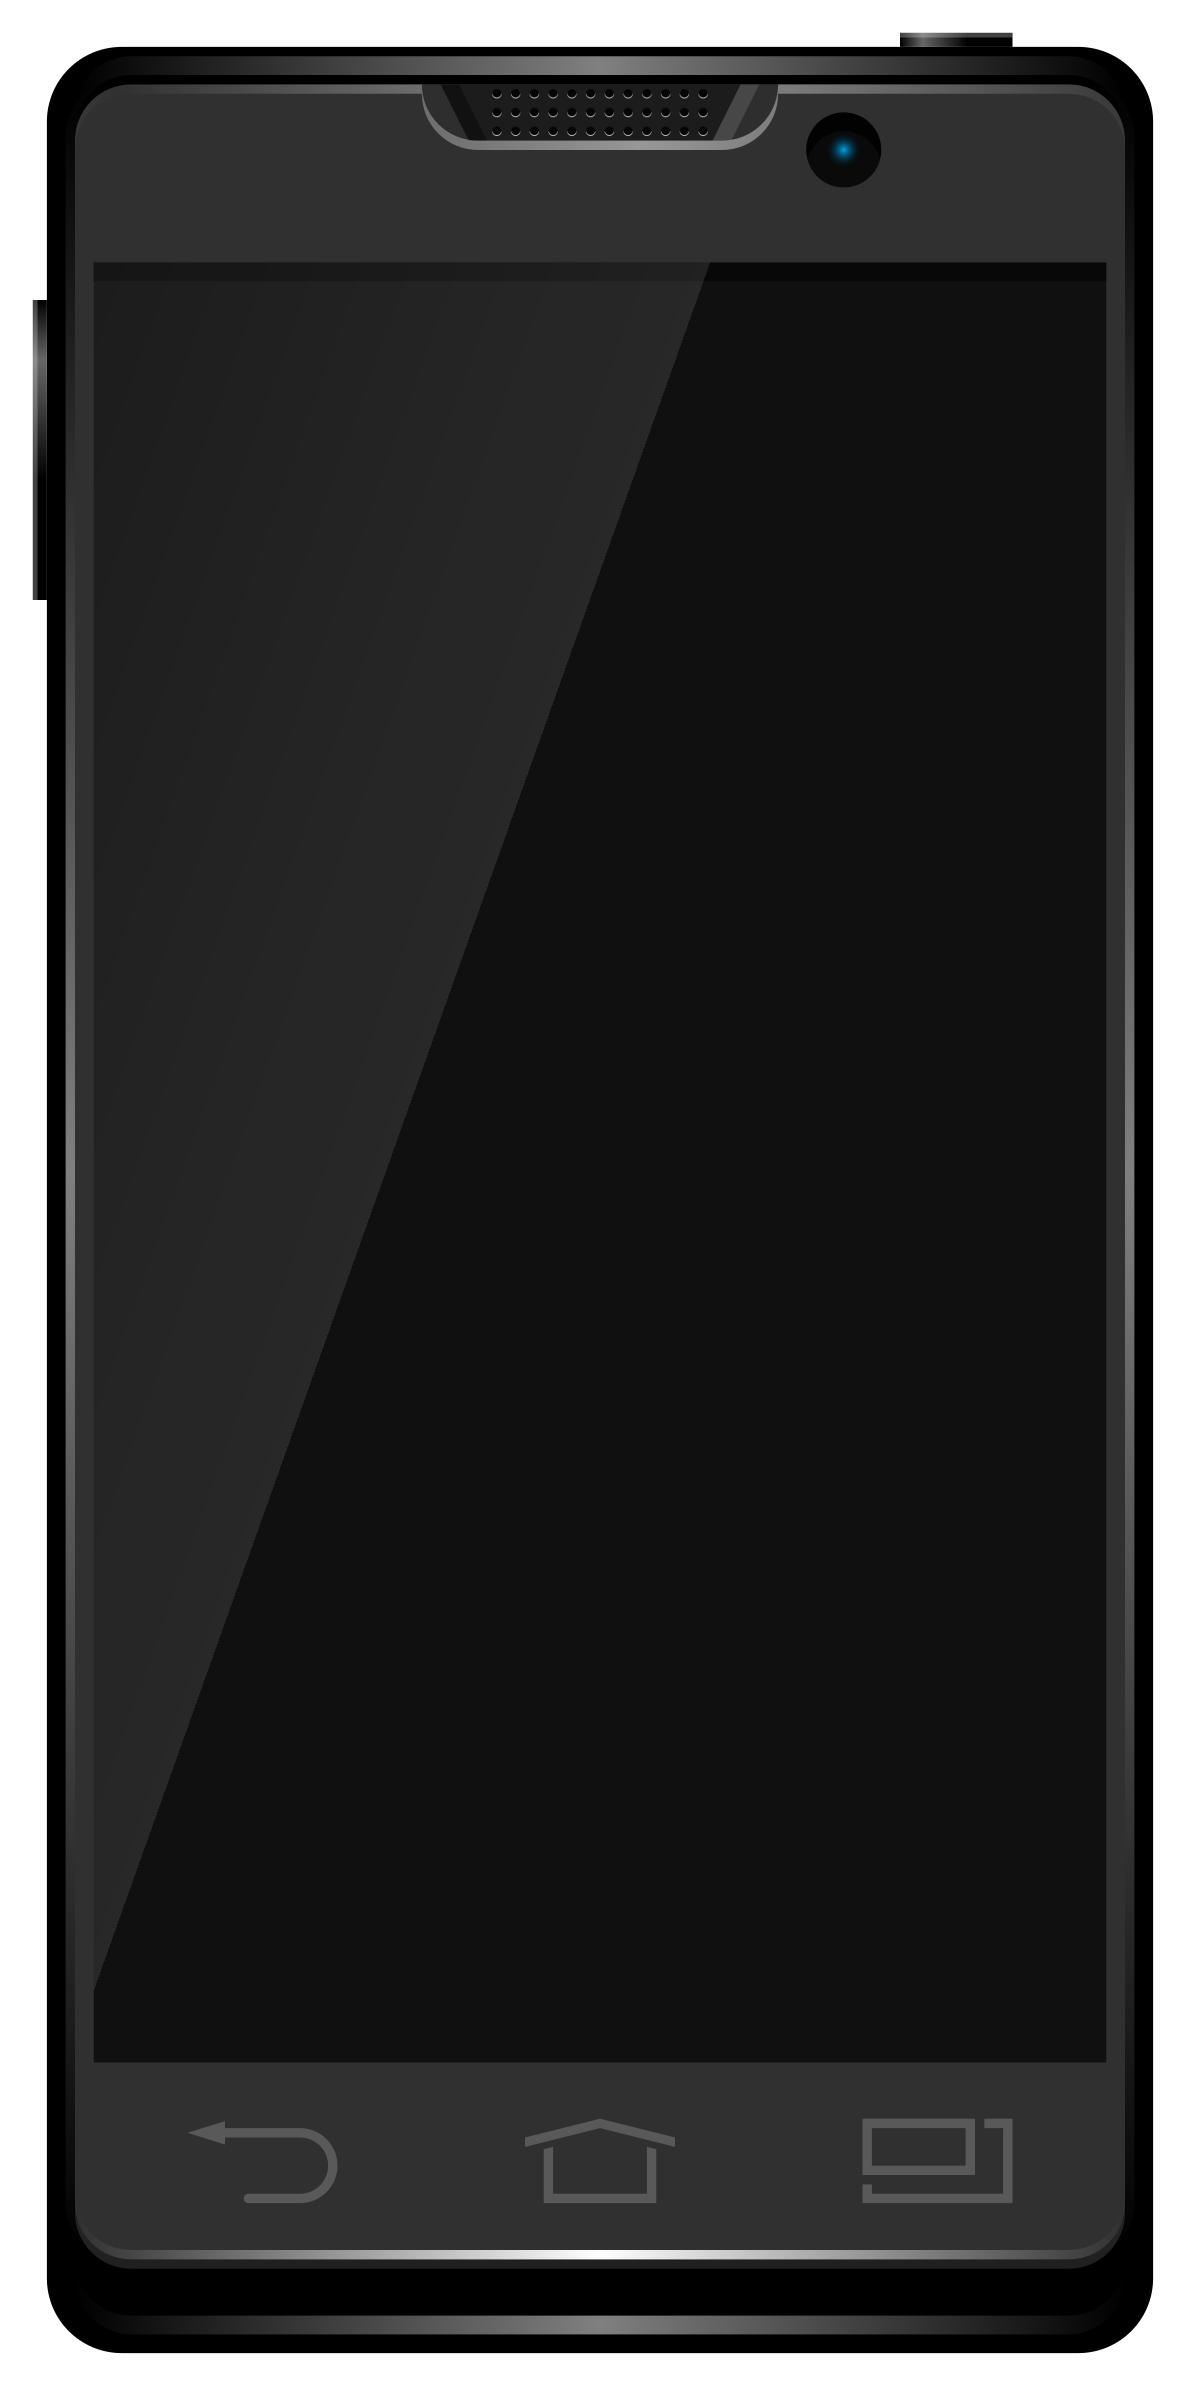 Smartphone (layered) png